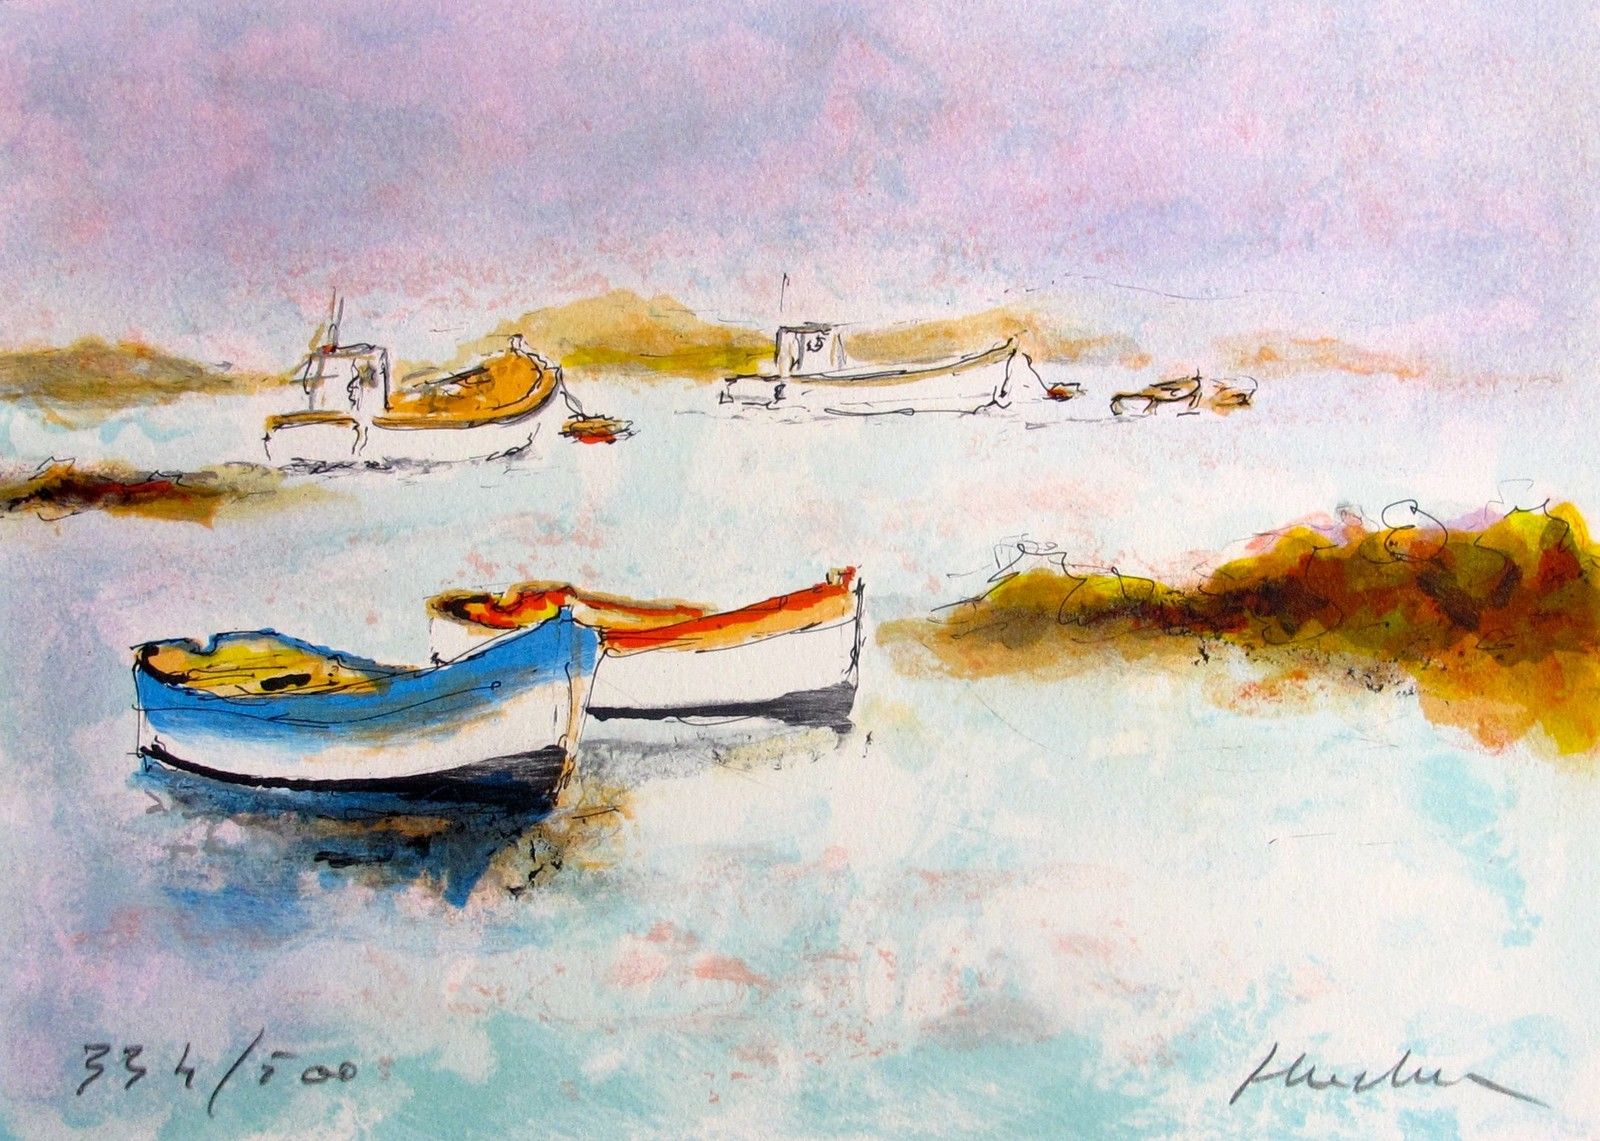 Urbain Huchet DEUX CANOES Hand Signed Limited Edition Lithograph